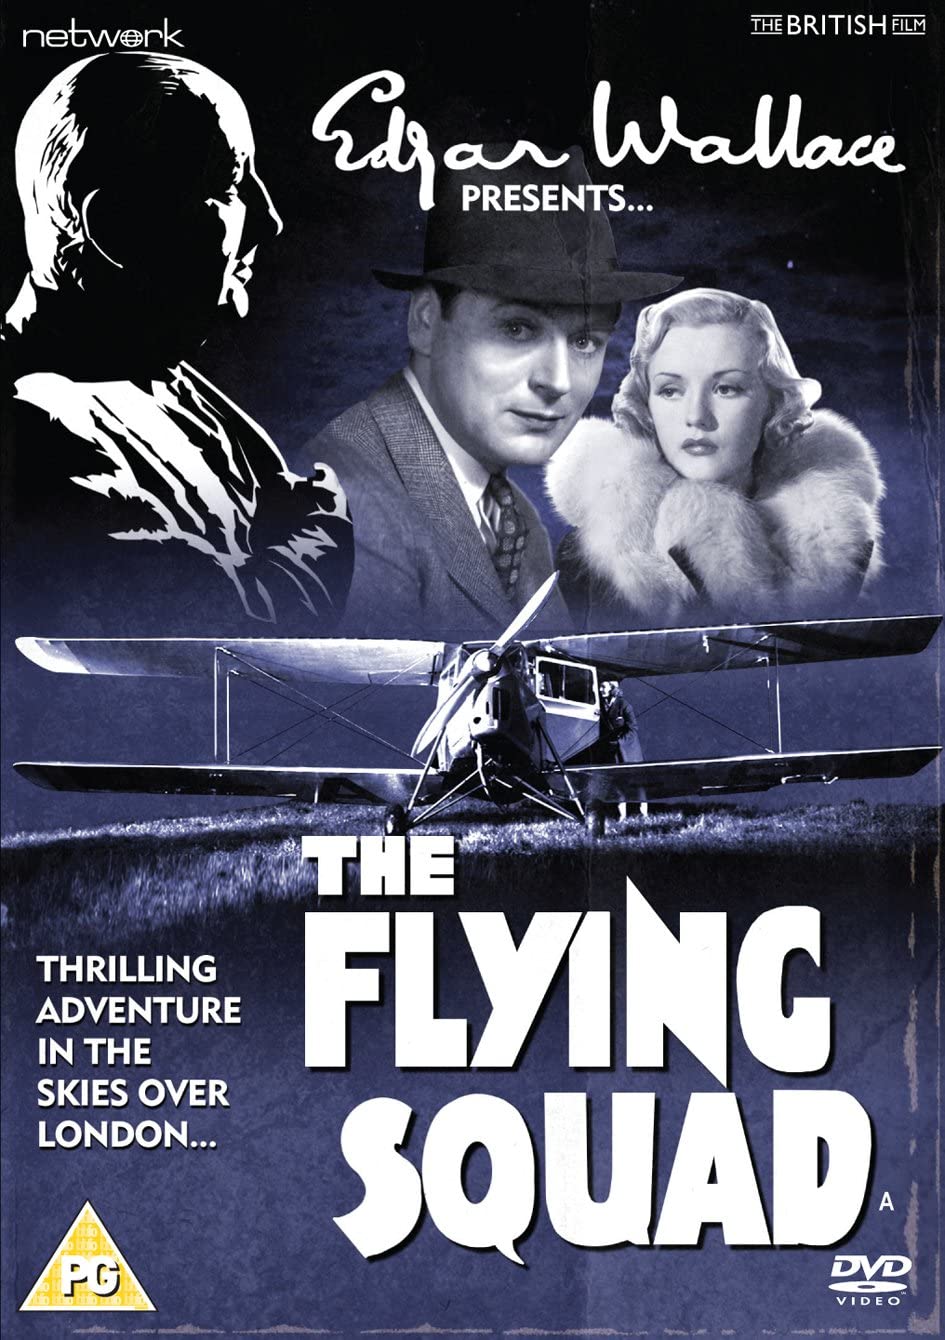 Edgar Wallace Presents: The Flying Squad [DVD]